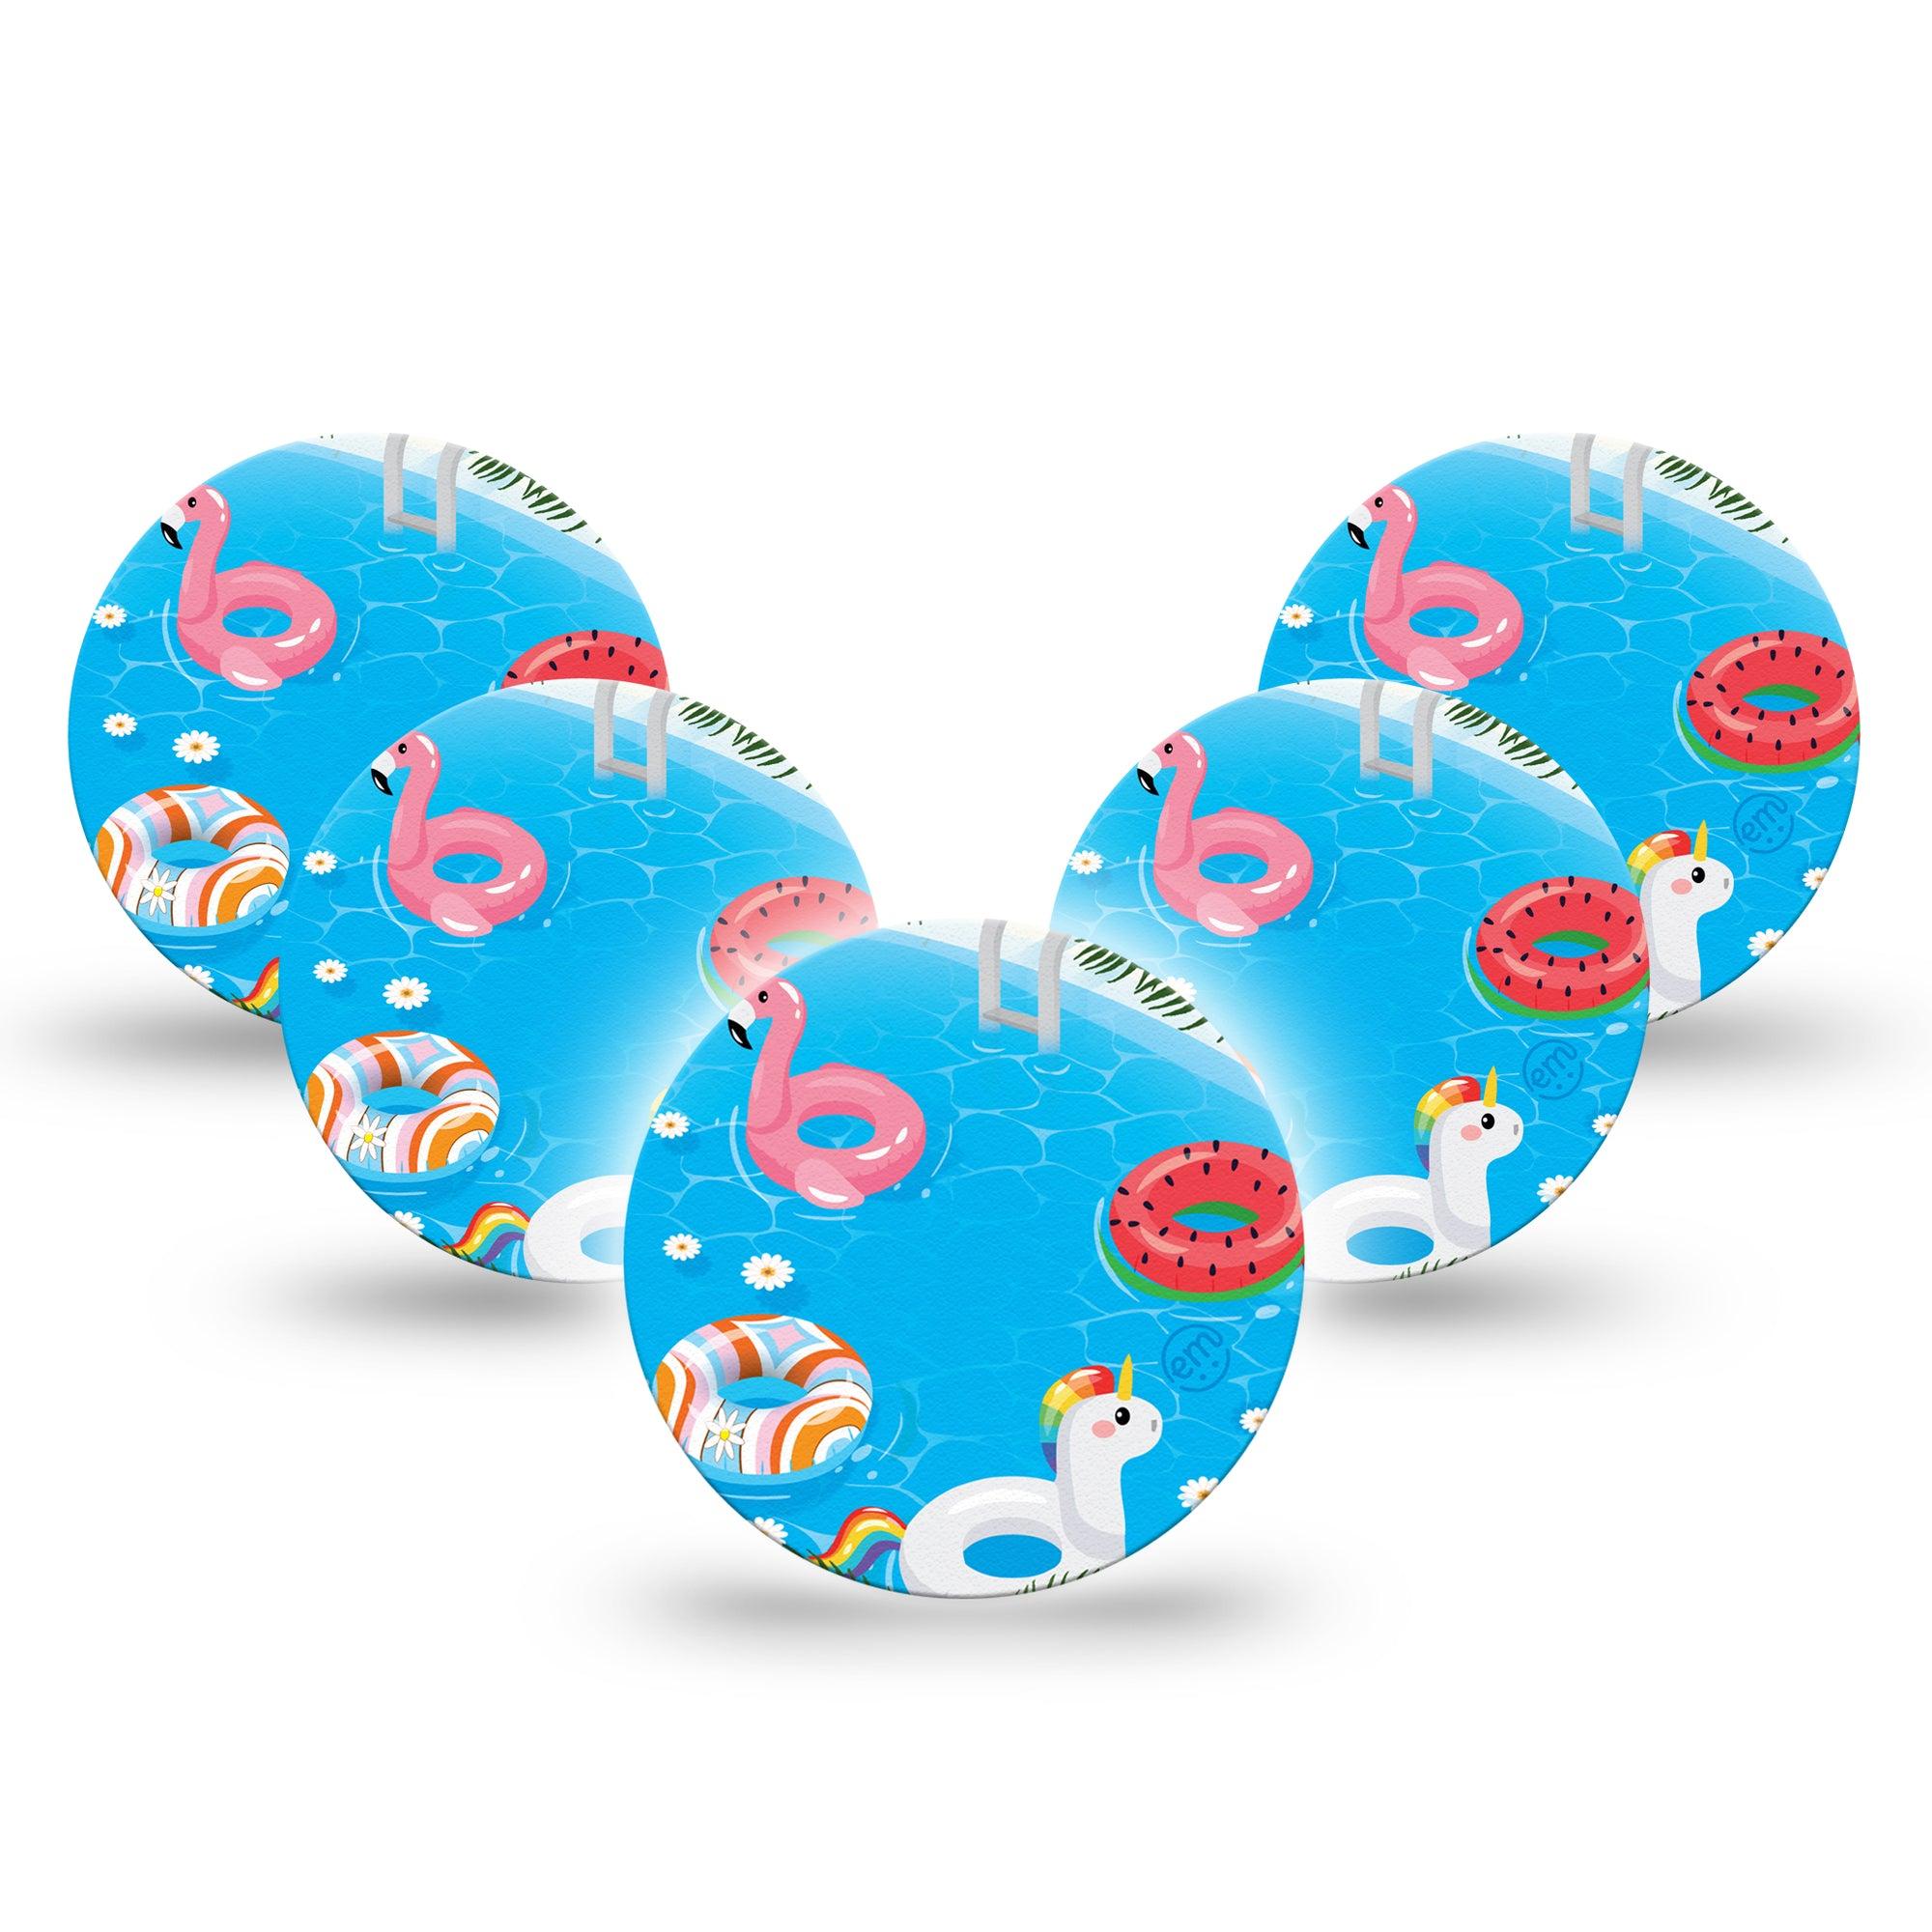 ExpressionMed Summer Pool Libre 3 Overapatch, 5-Pack, Pool Floaters Themed, CGM Plaster Tape Design